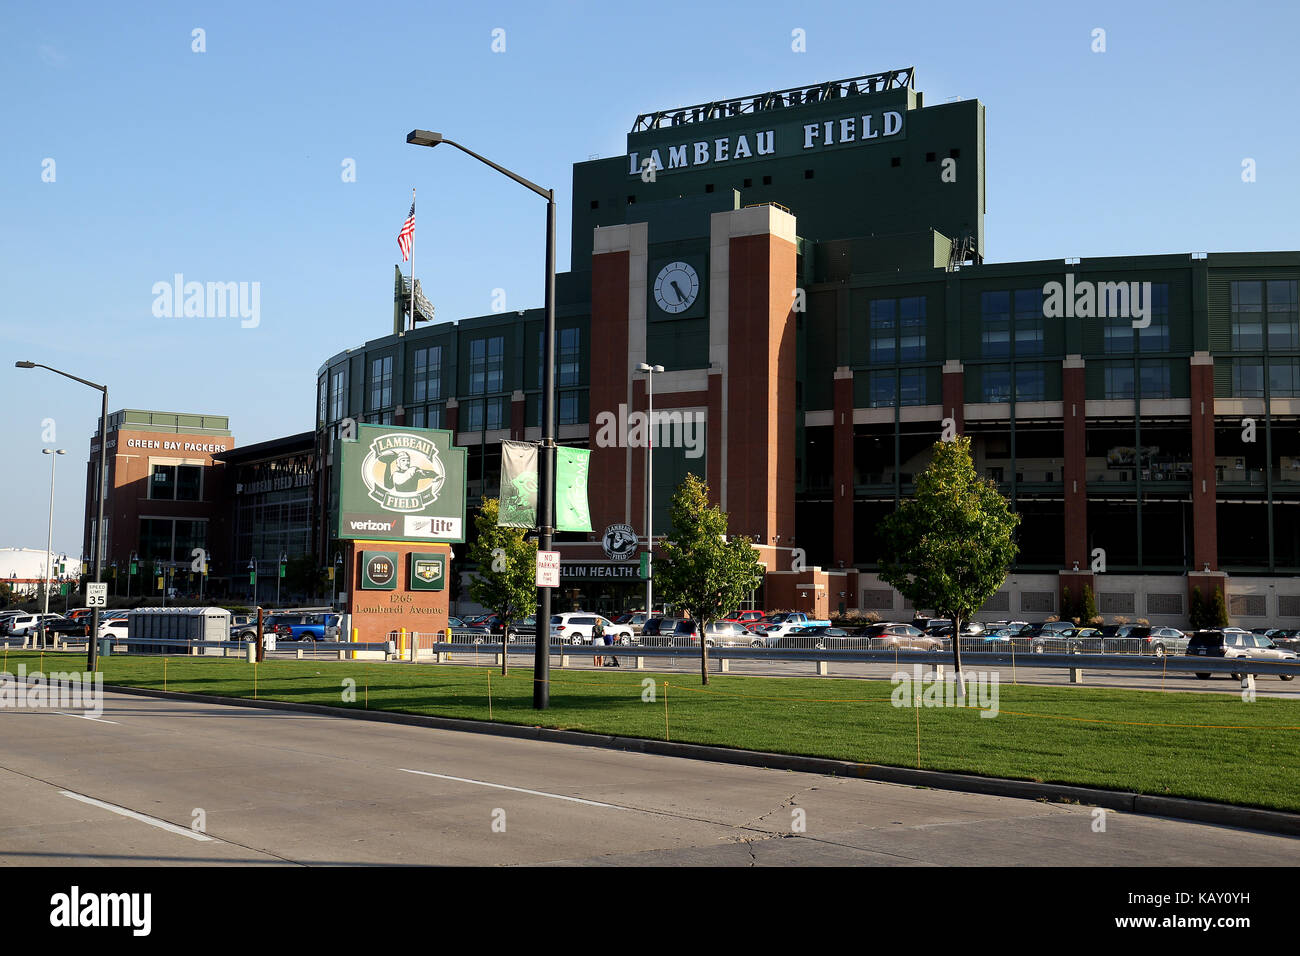 Green Bay, Wisconsin, Lambeau Field home of the NFL Green Bay Packers. Stock Photo